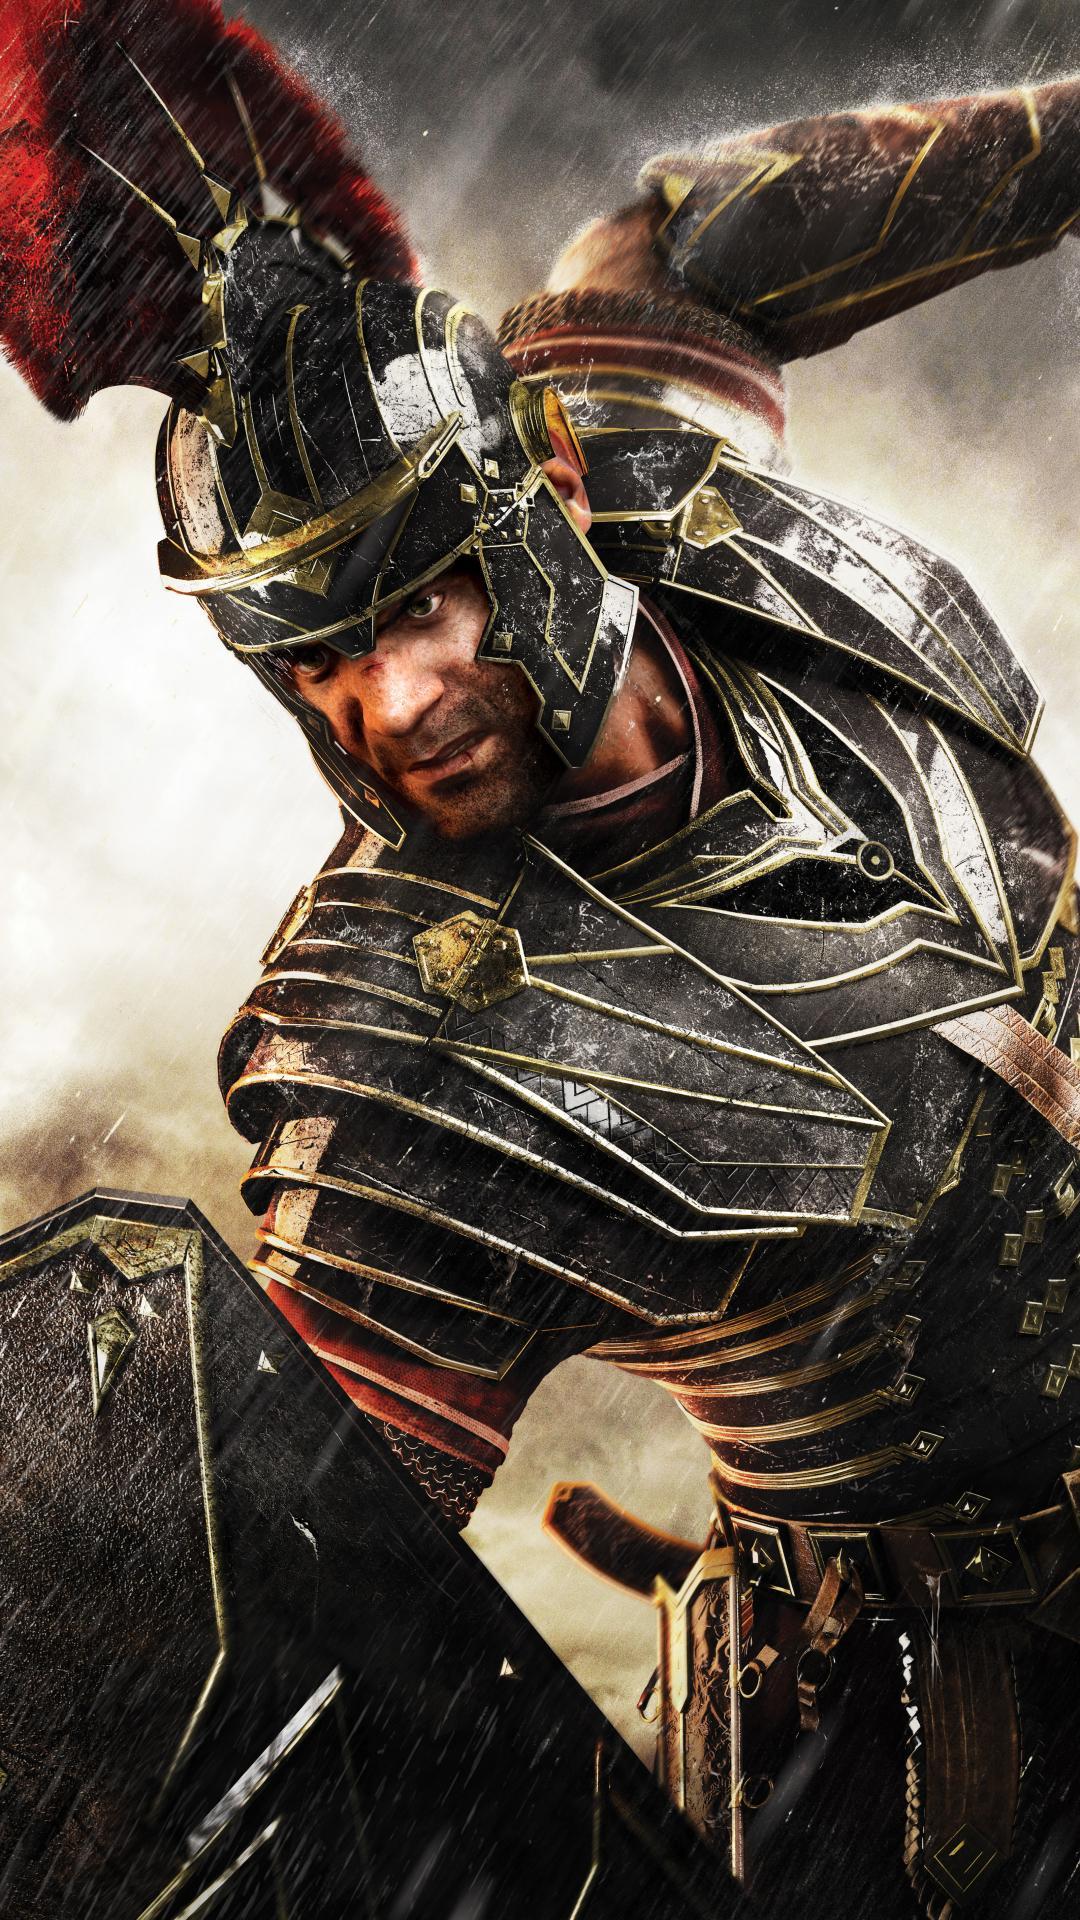 Ryse: Son Of Rome Wallpapers